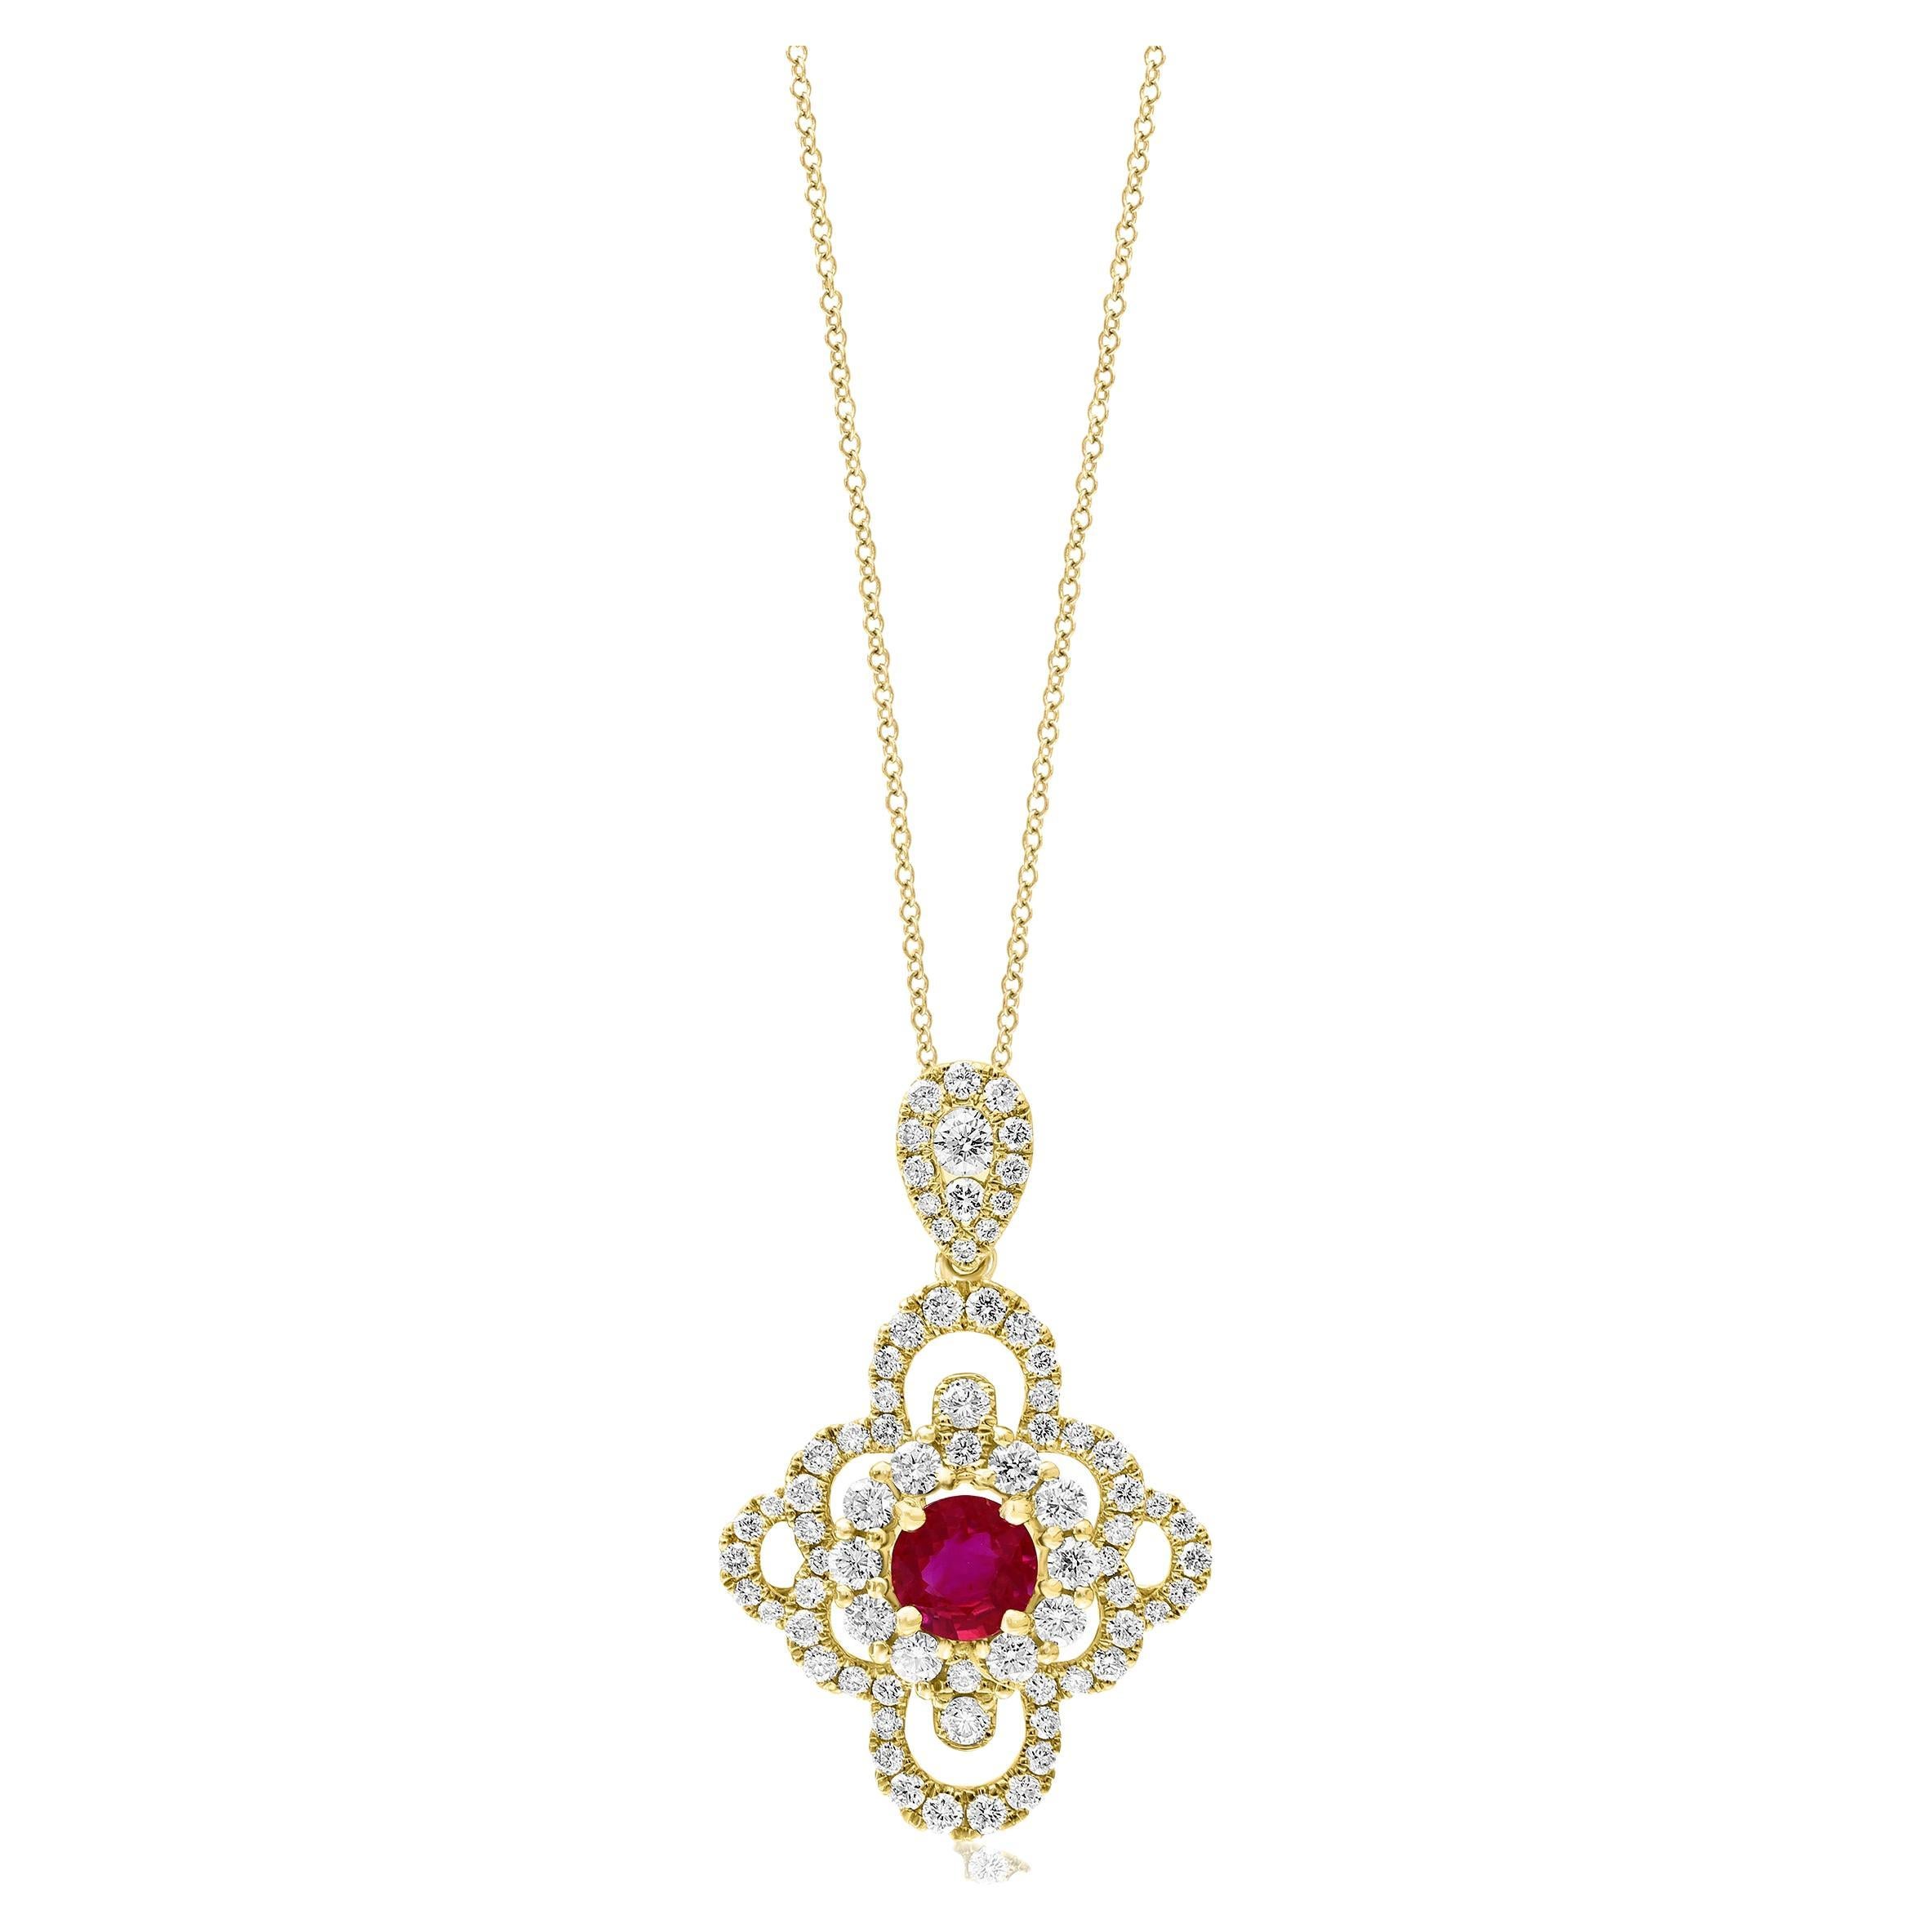 0.67 Carat Round Cut Ruby and Diamond Pendant Necklace in 18K Yellow Gold For Sale